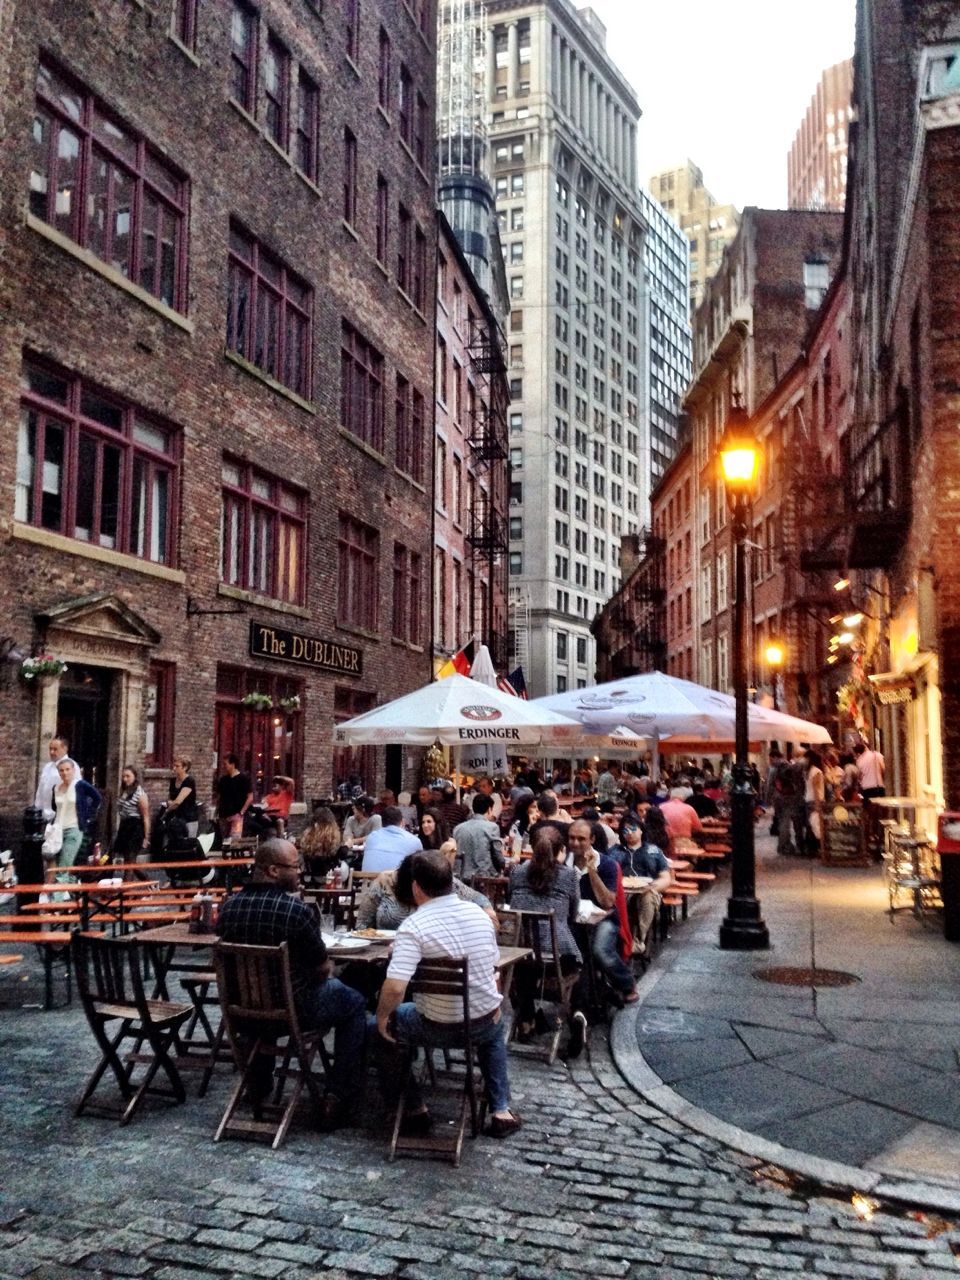 Stone street for dinner. One of my